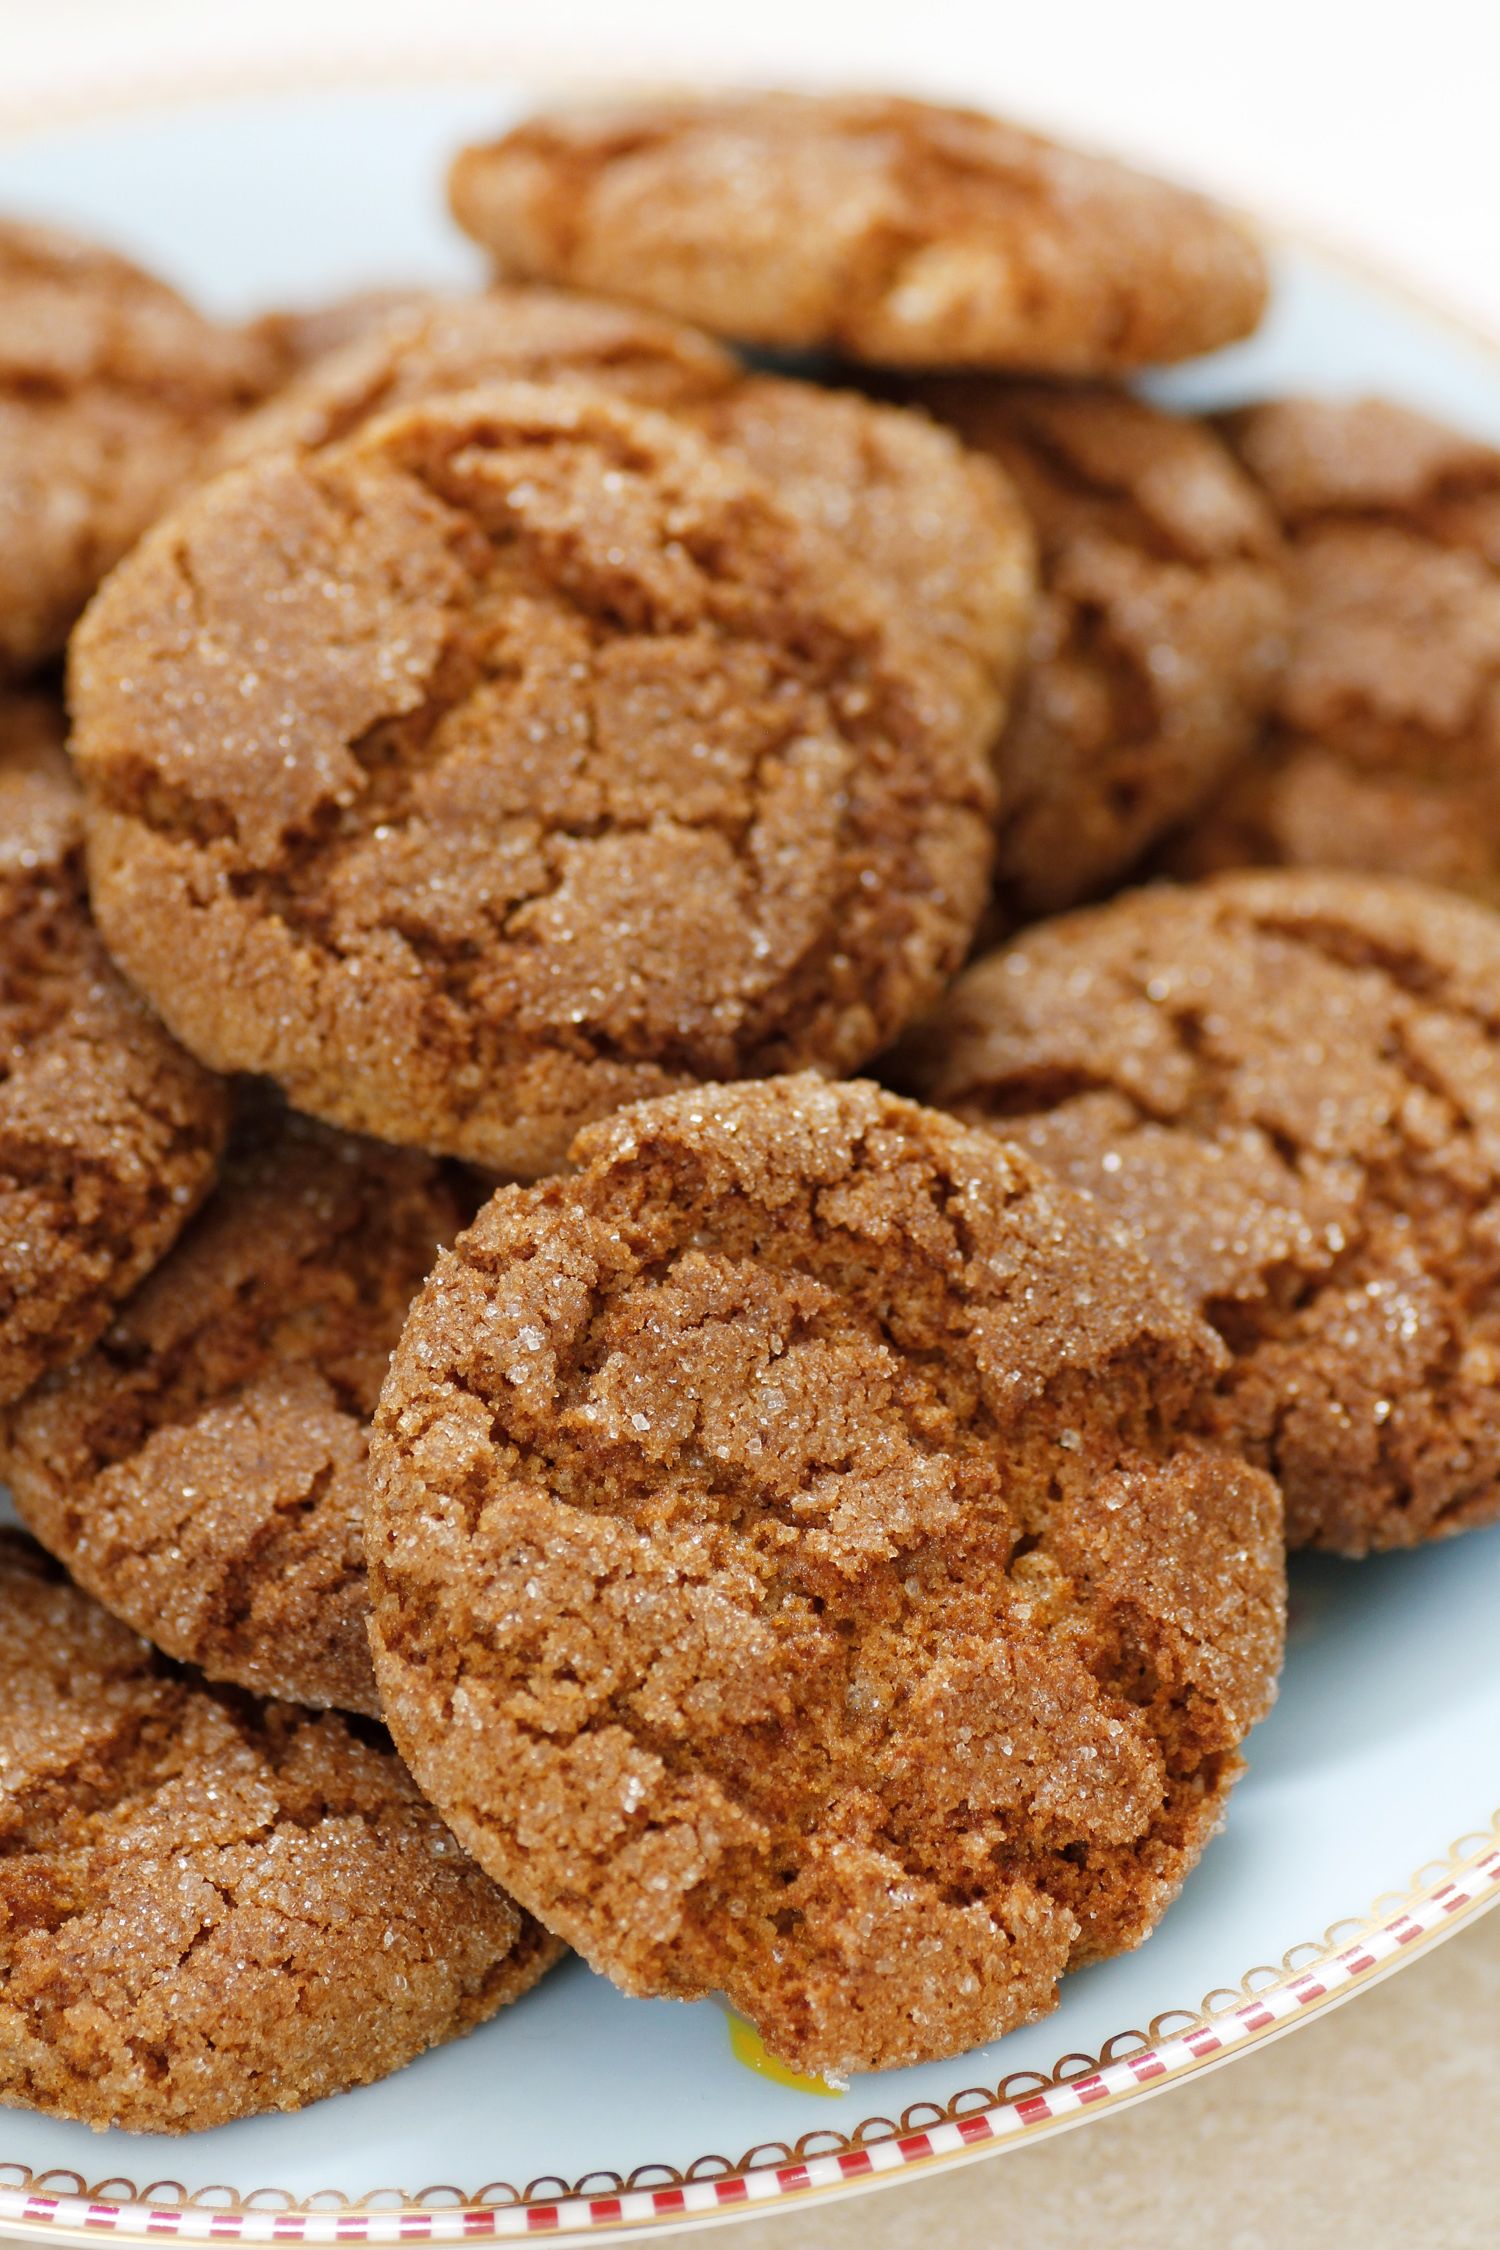 Soft Gingersnap Cookies